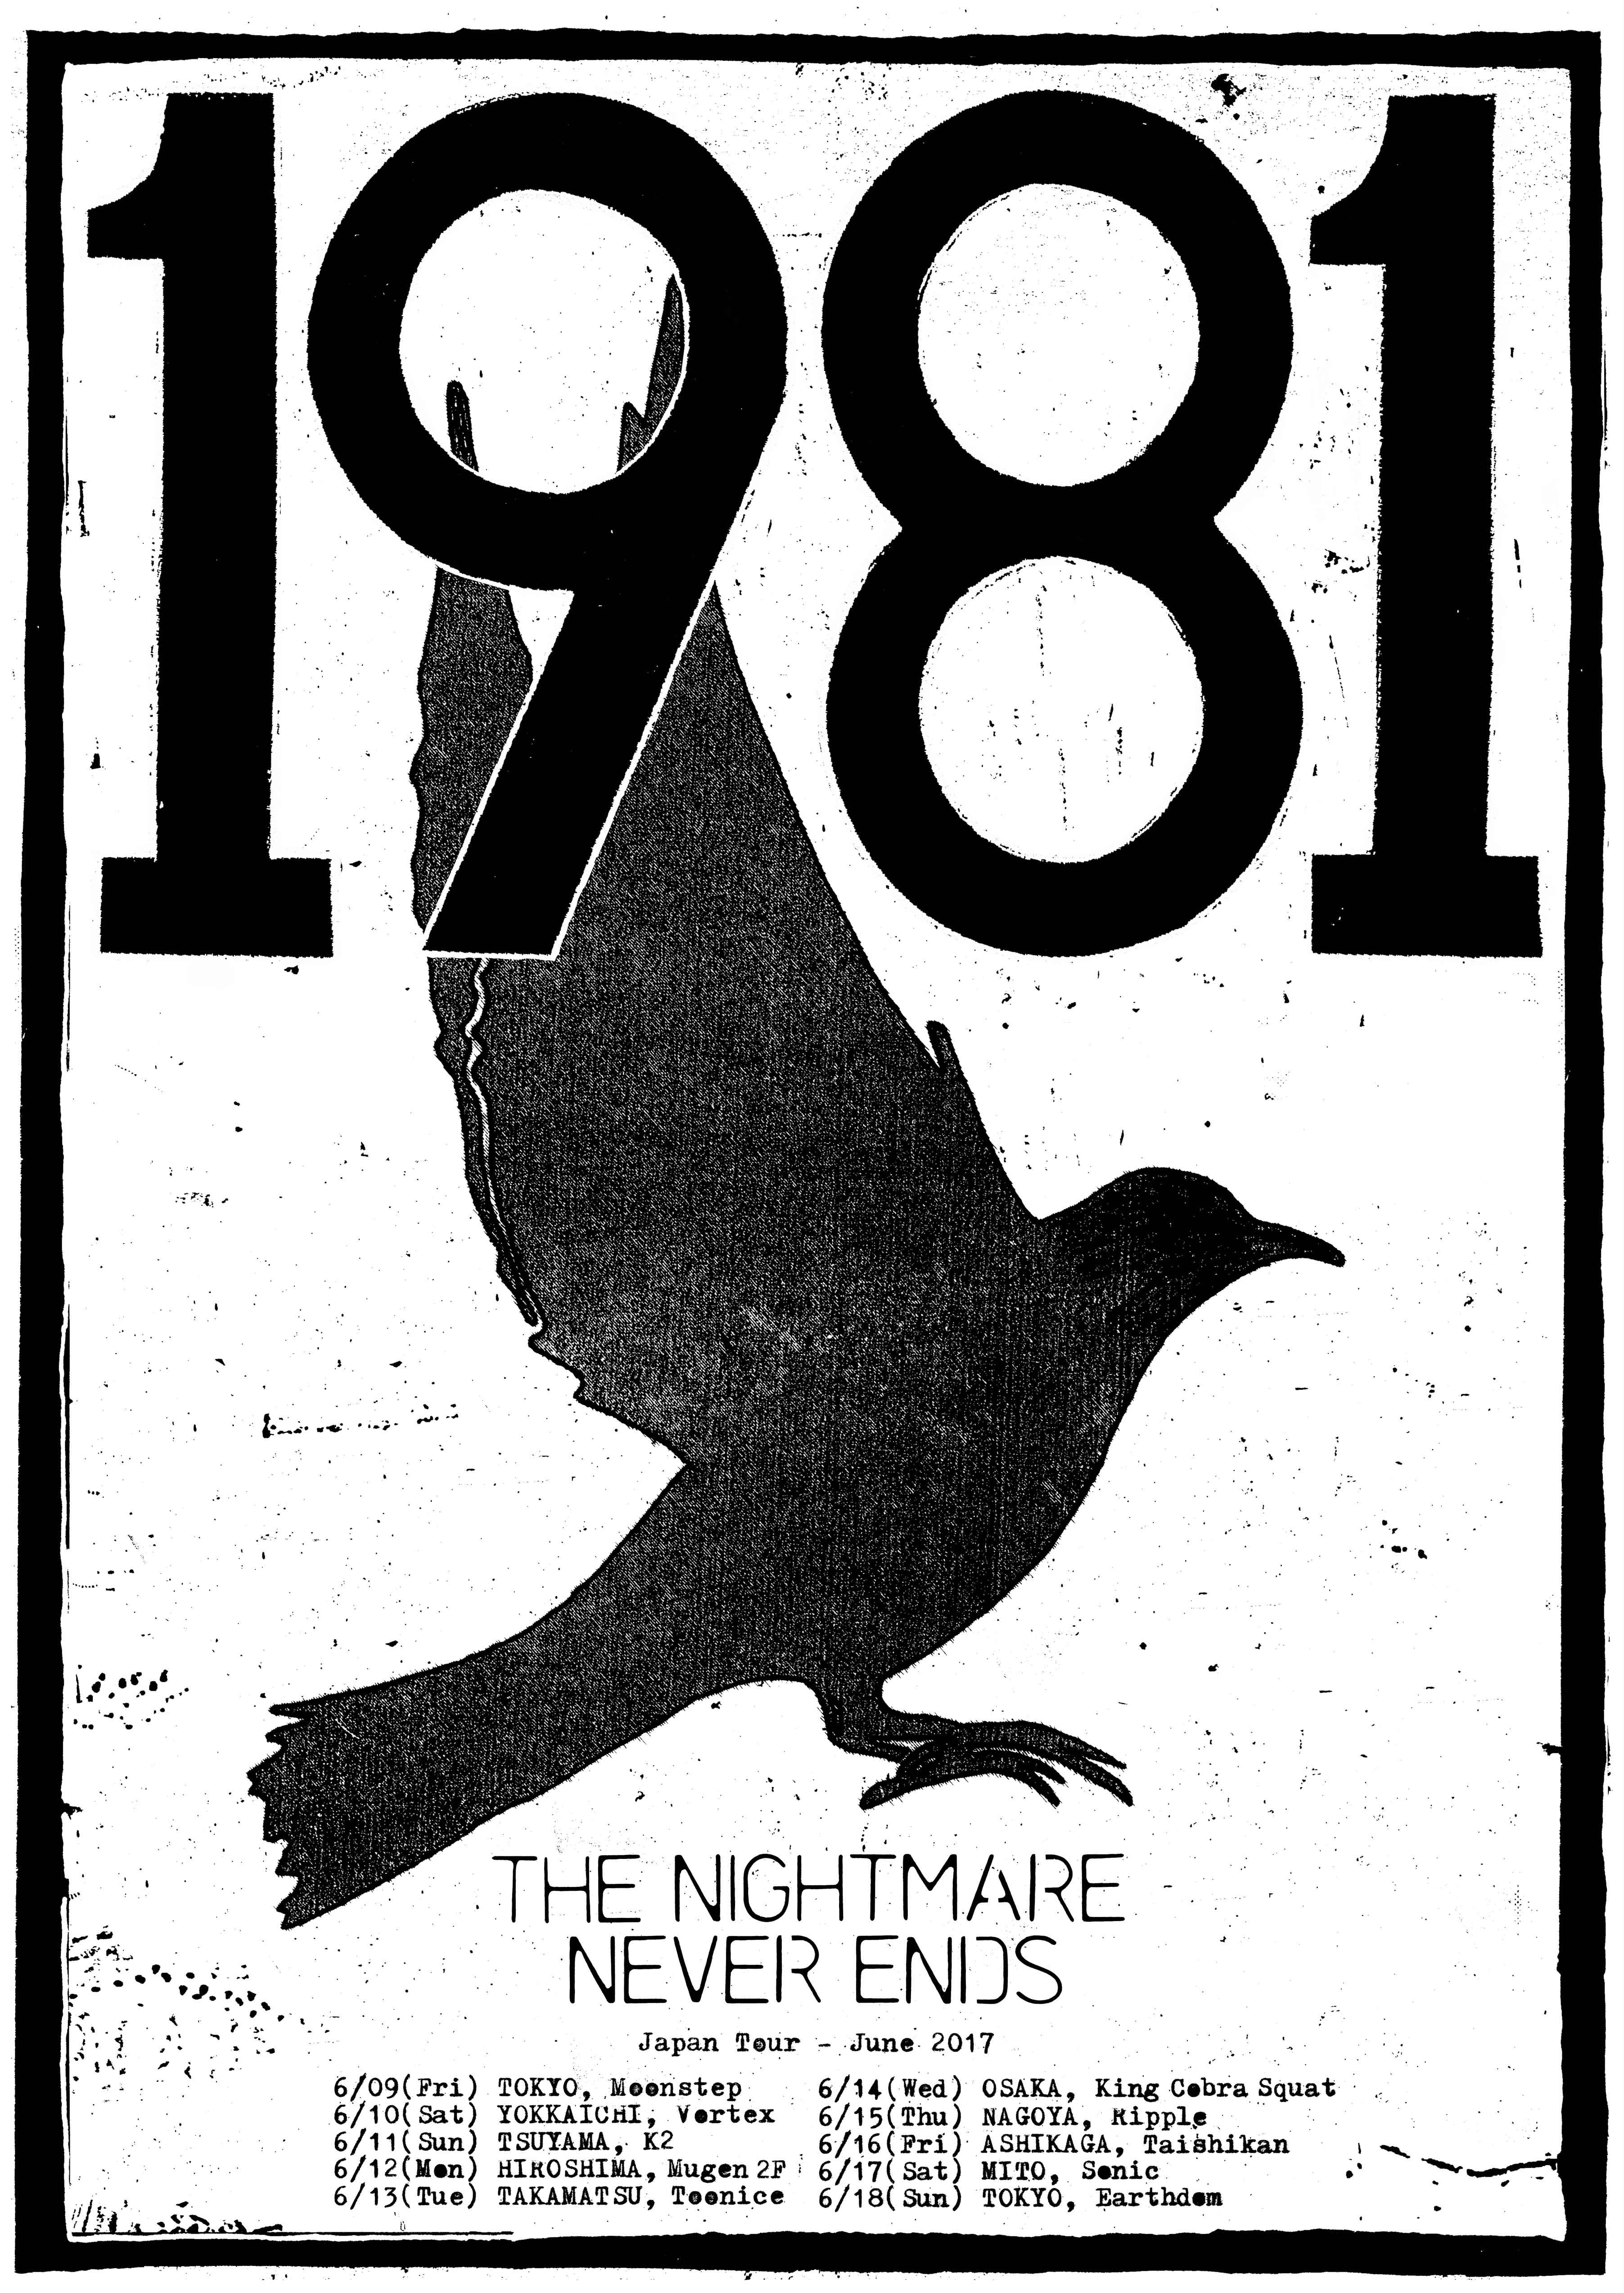 1981 - "THE NIGHTMARE NEVER ENDS" Japan Tour 2017